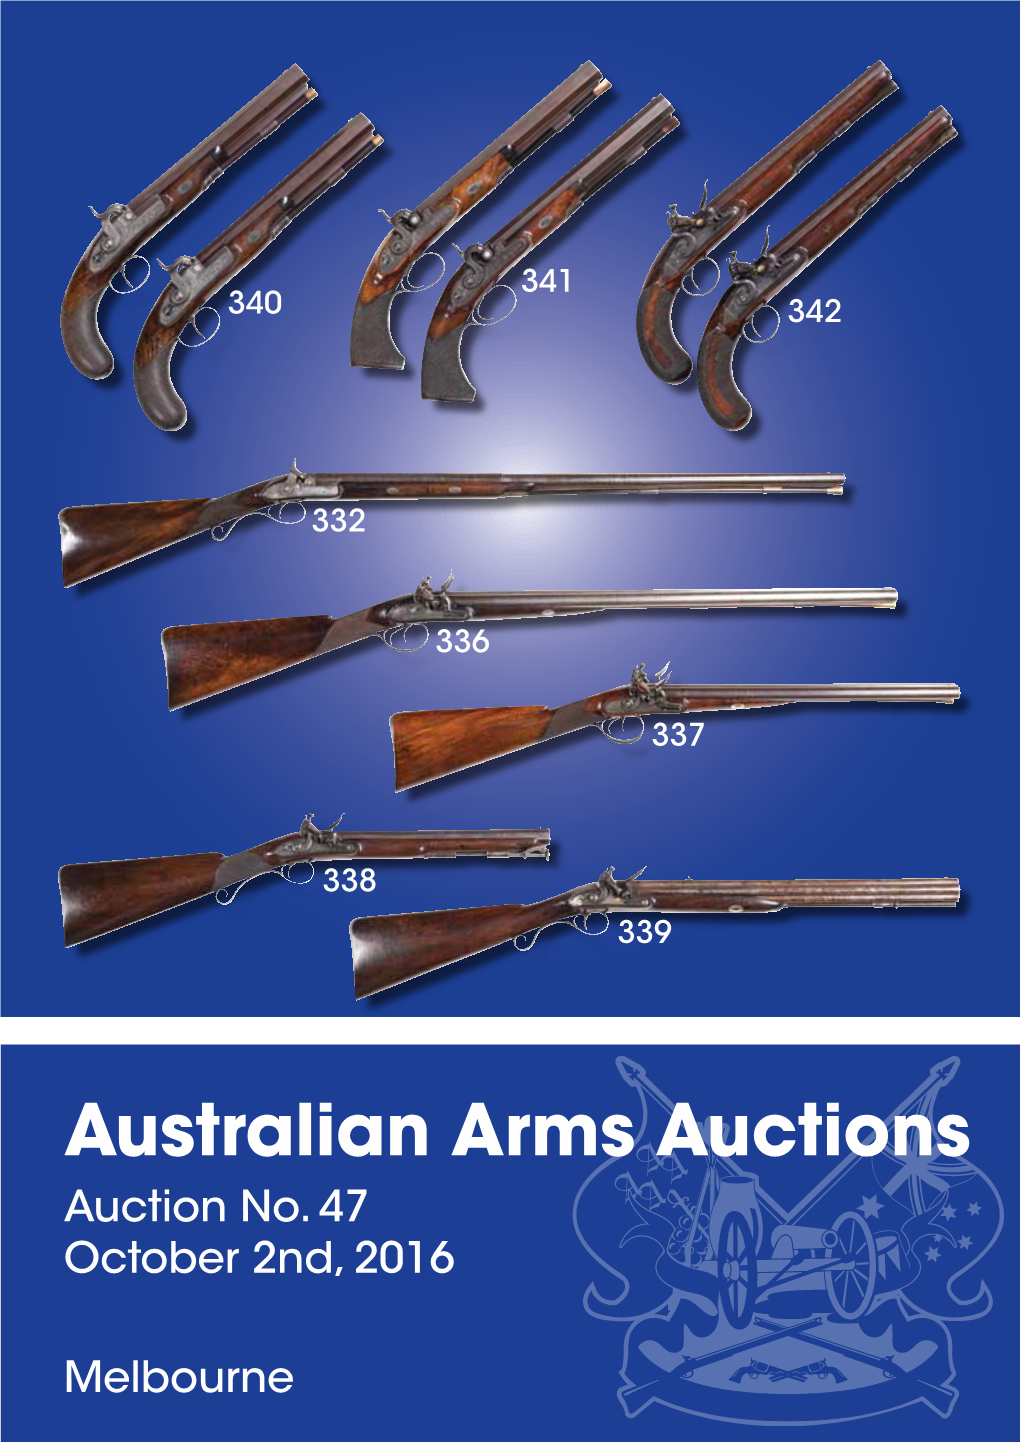 Australian Arms Auctions Pty Ltd Specialist Auctioneers & Valuers of Fine Guns, Weapons, Militaria & Collections